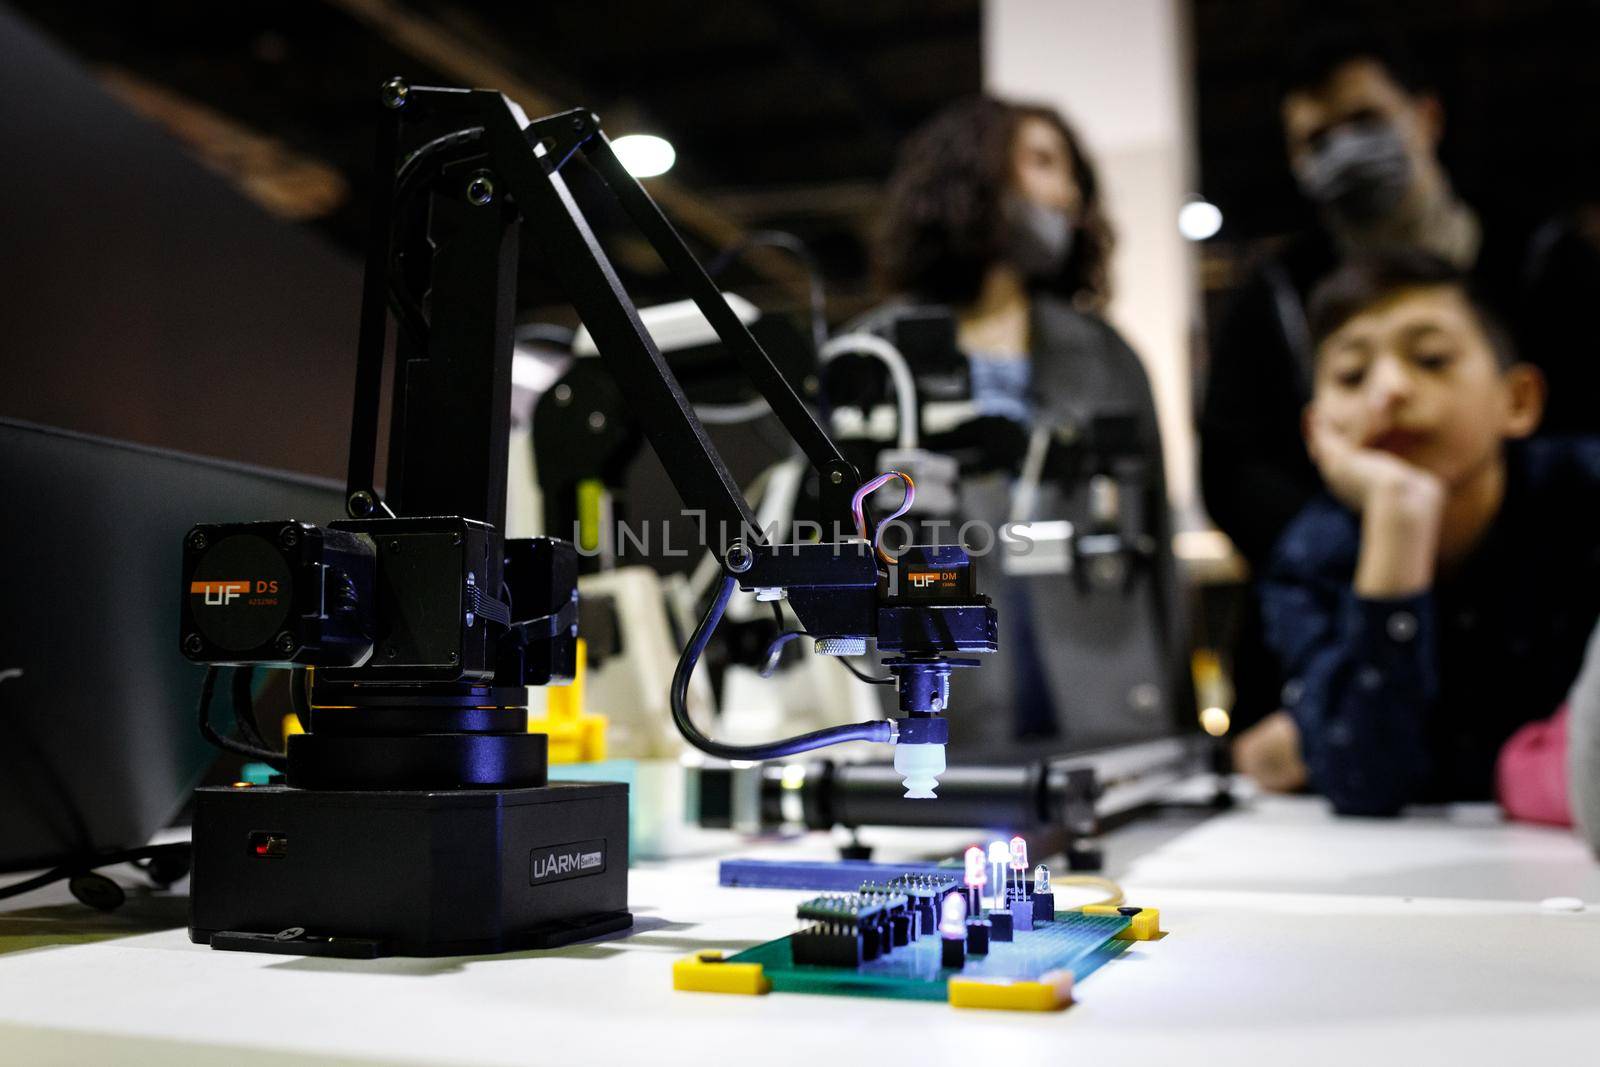 Conveyor-type robot mounting chips at the exhibition stand of the robot festival by Rom4ek